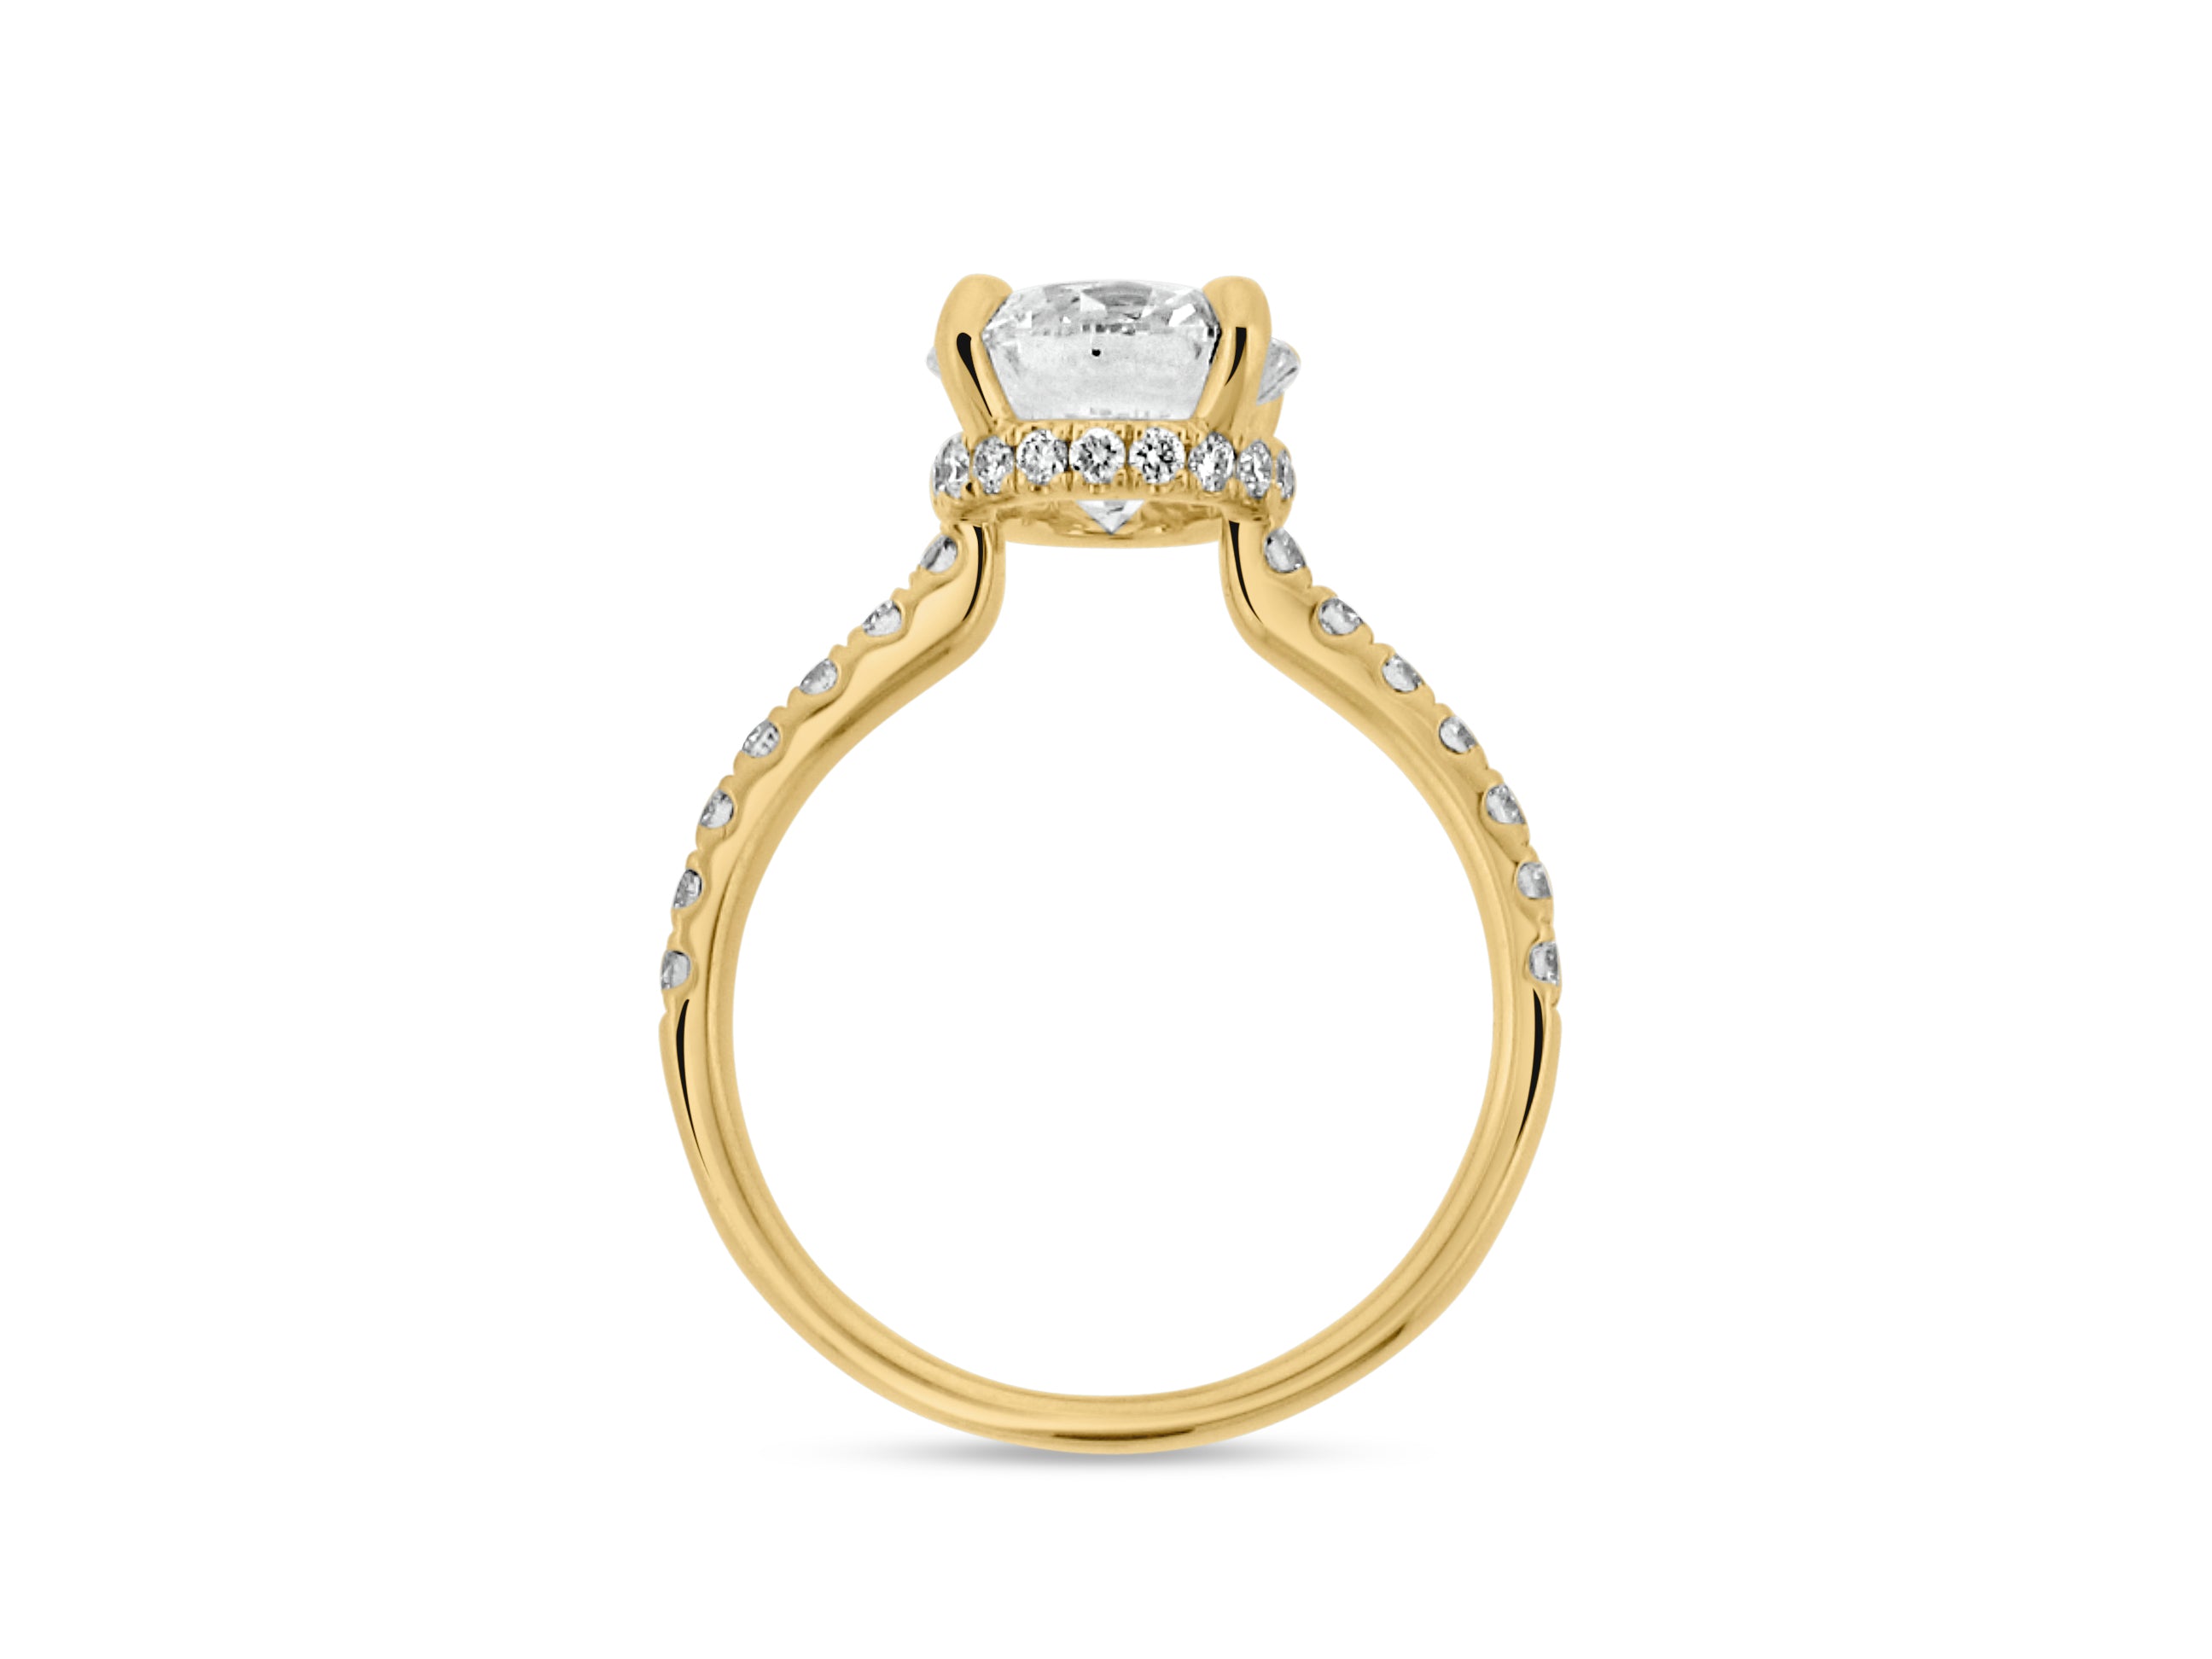 PRIVE' 18K YELLOW GOLD 2.29CT SI1 CLARITY AND F COLOR ROUND SWAROVSKI LAB GROWN DIAMOND SURROUNDED BY .47CT VS/SI-G NATURAL DIAMONDS - CERTIFIED XXX CUT GRADE